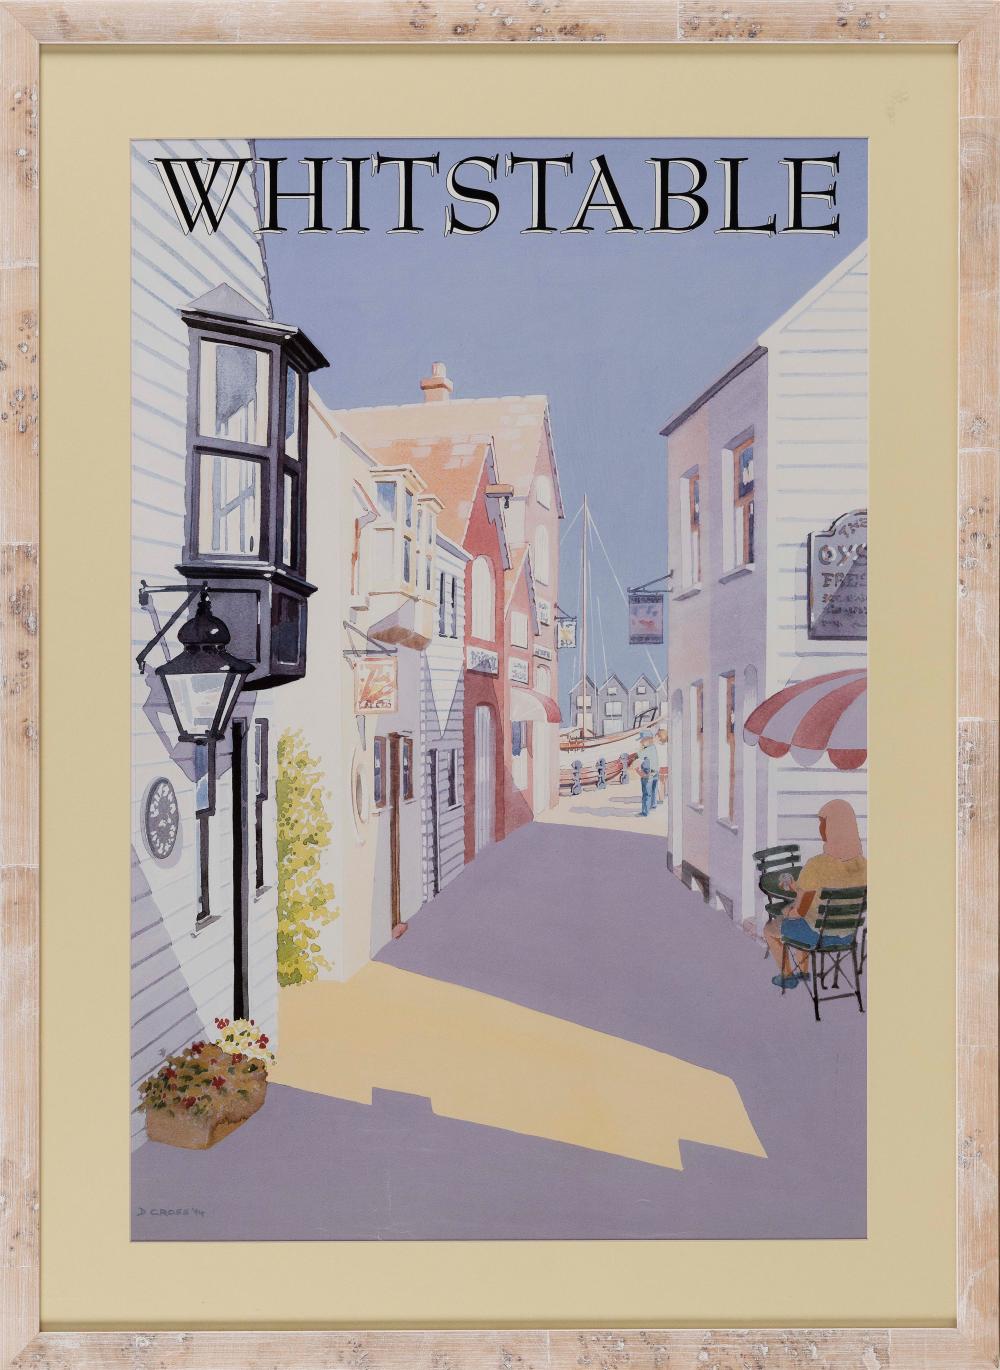 WHITSTABLE PRINT 28 X 18 75 SIGHT  34bc8f